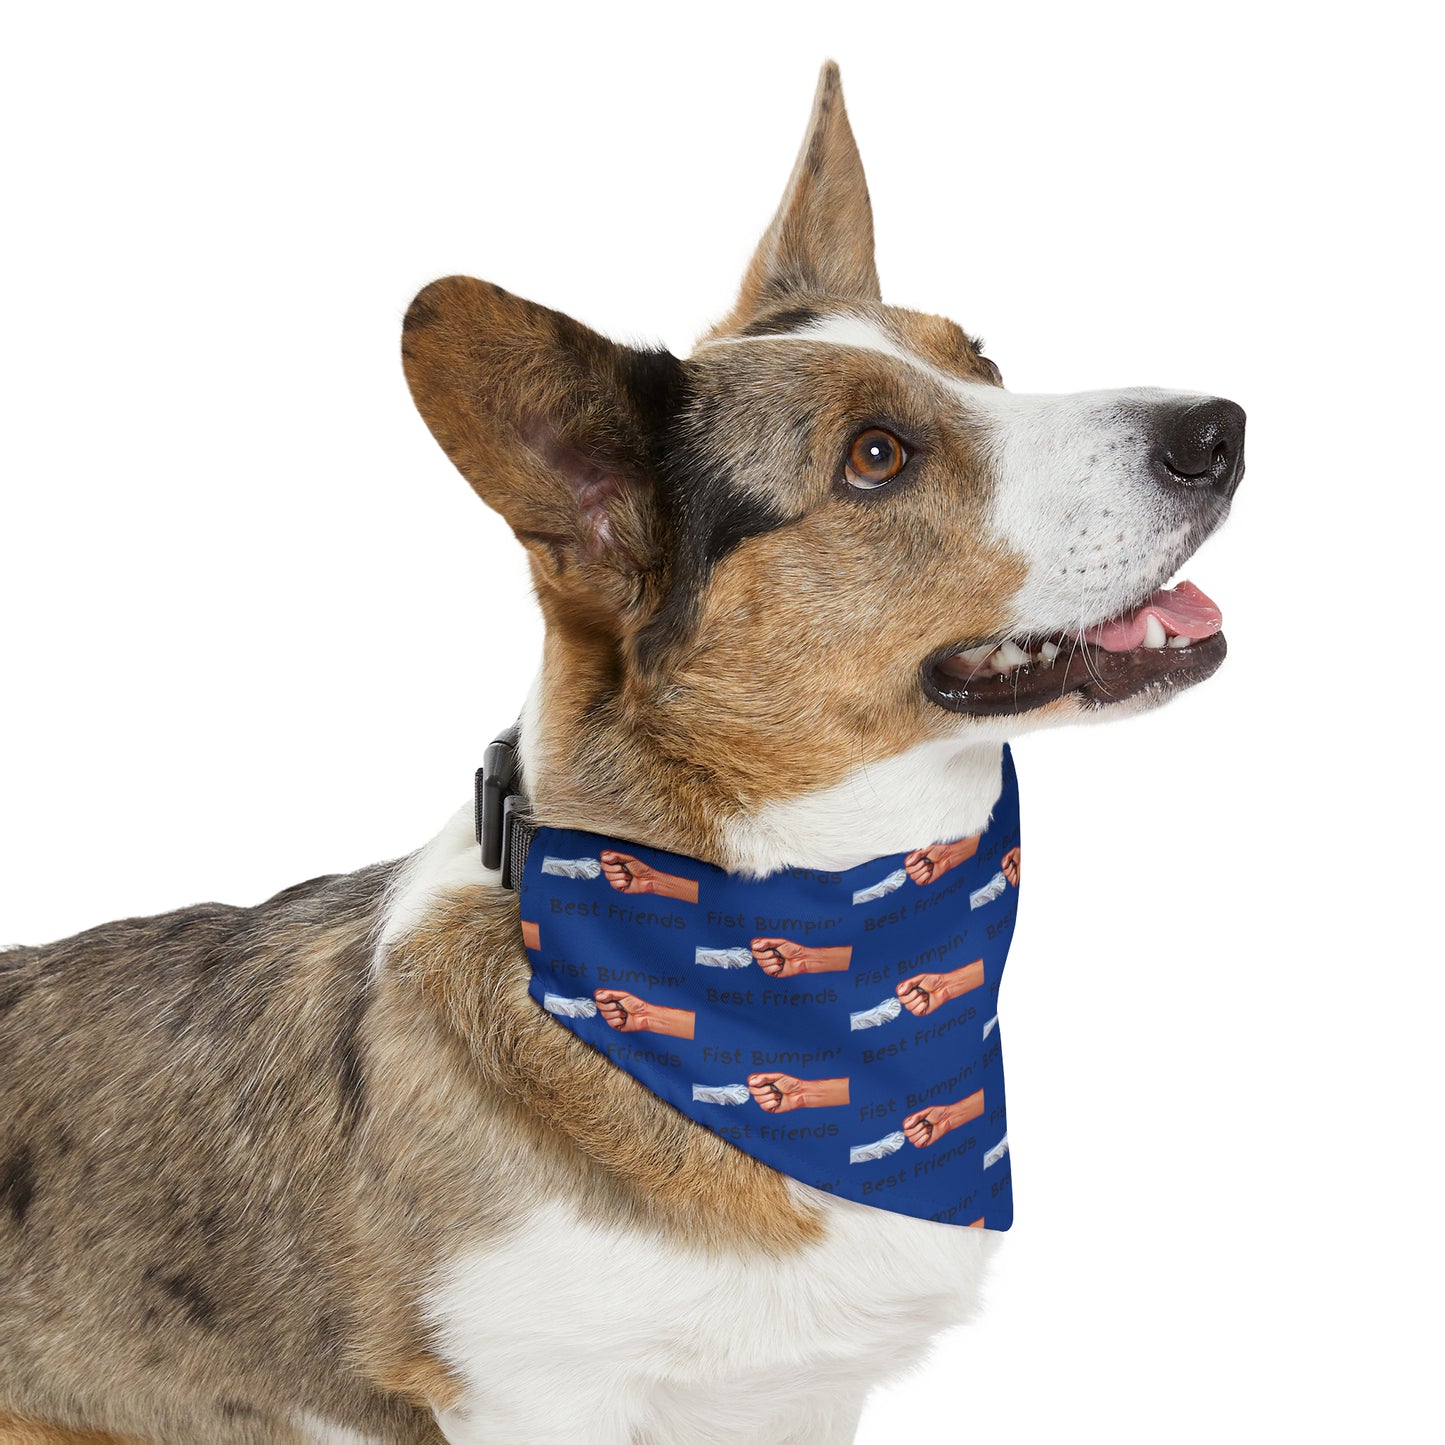 Fist Bumpin’ Best Friends Opie’s Cavalier King Charles Spaniel Pet Bandana Collar Blue with Black lettering.